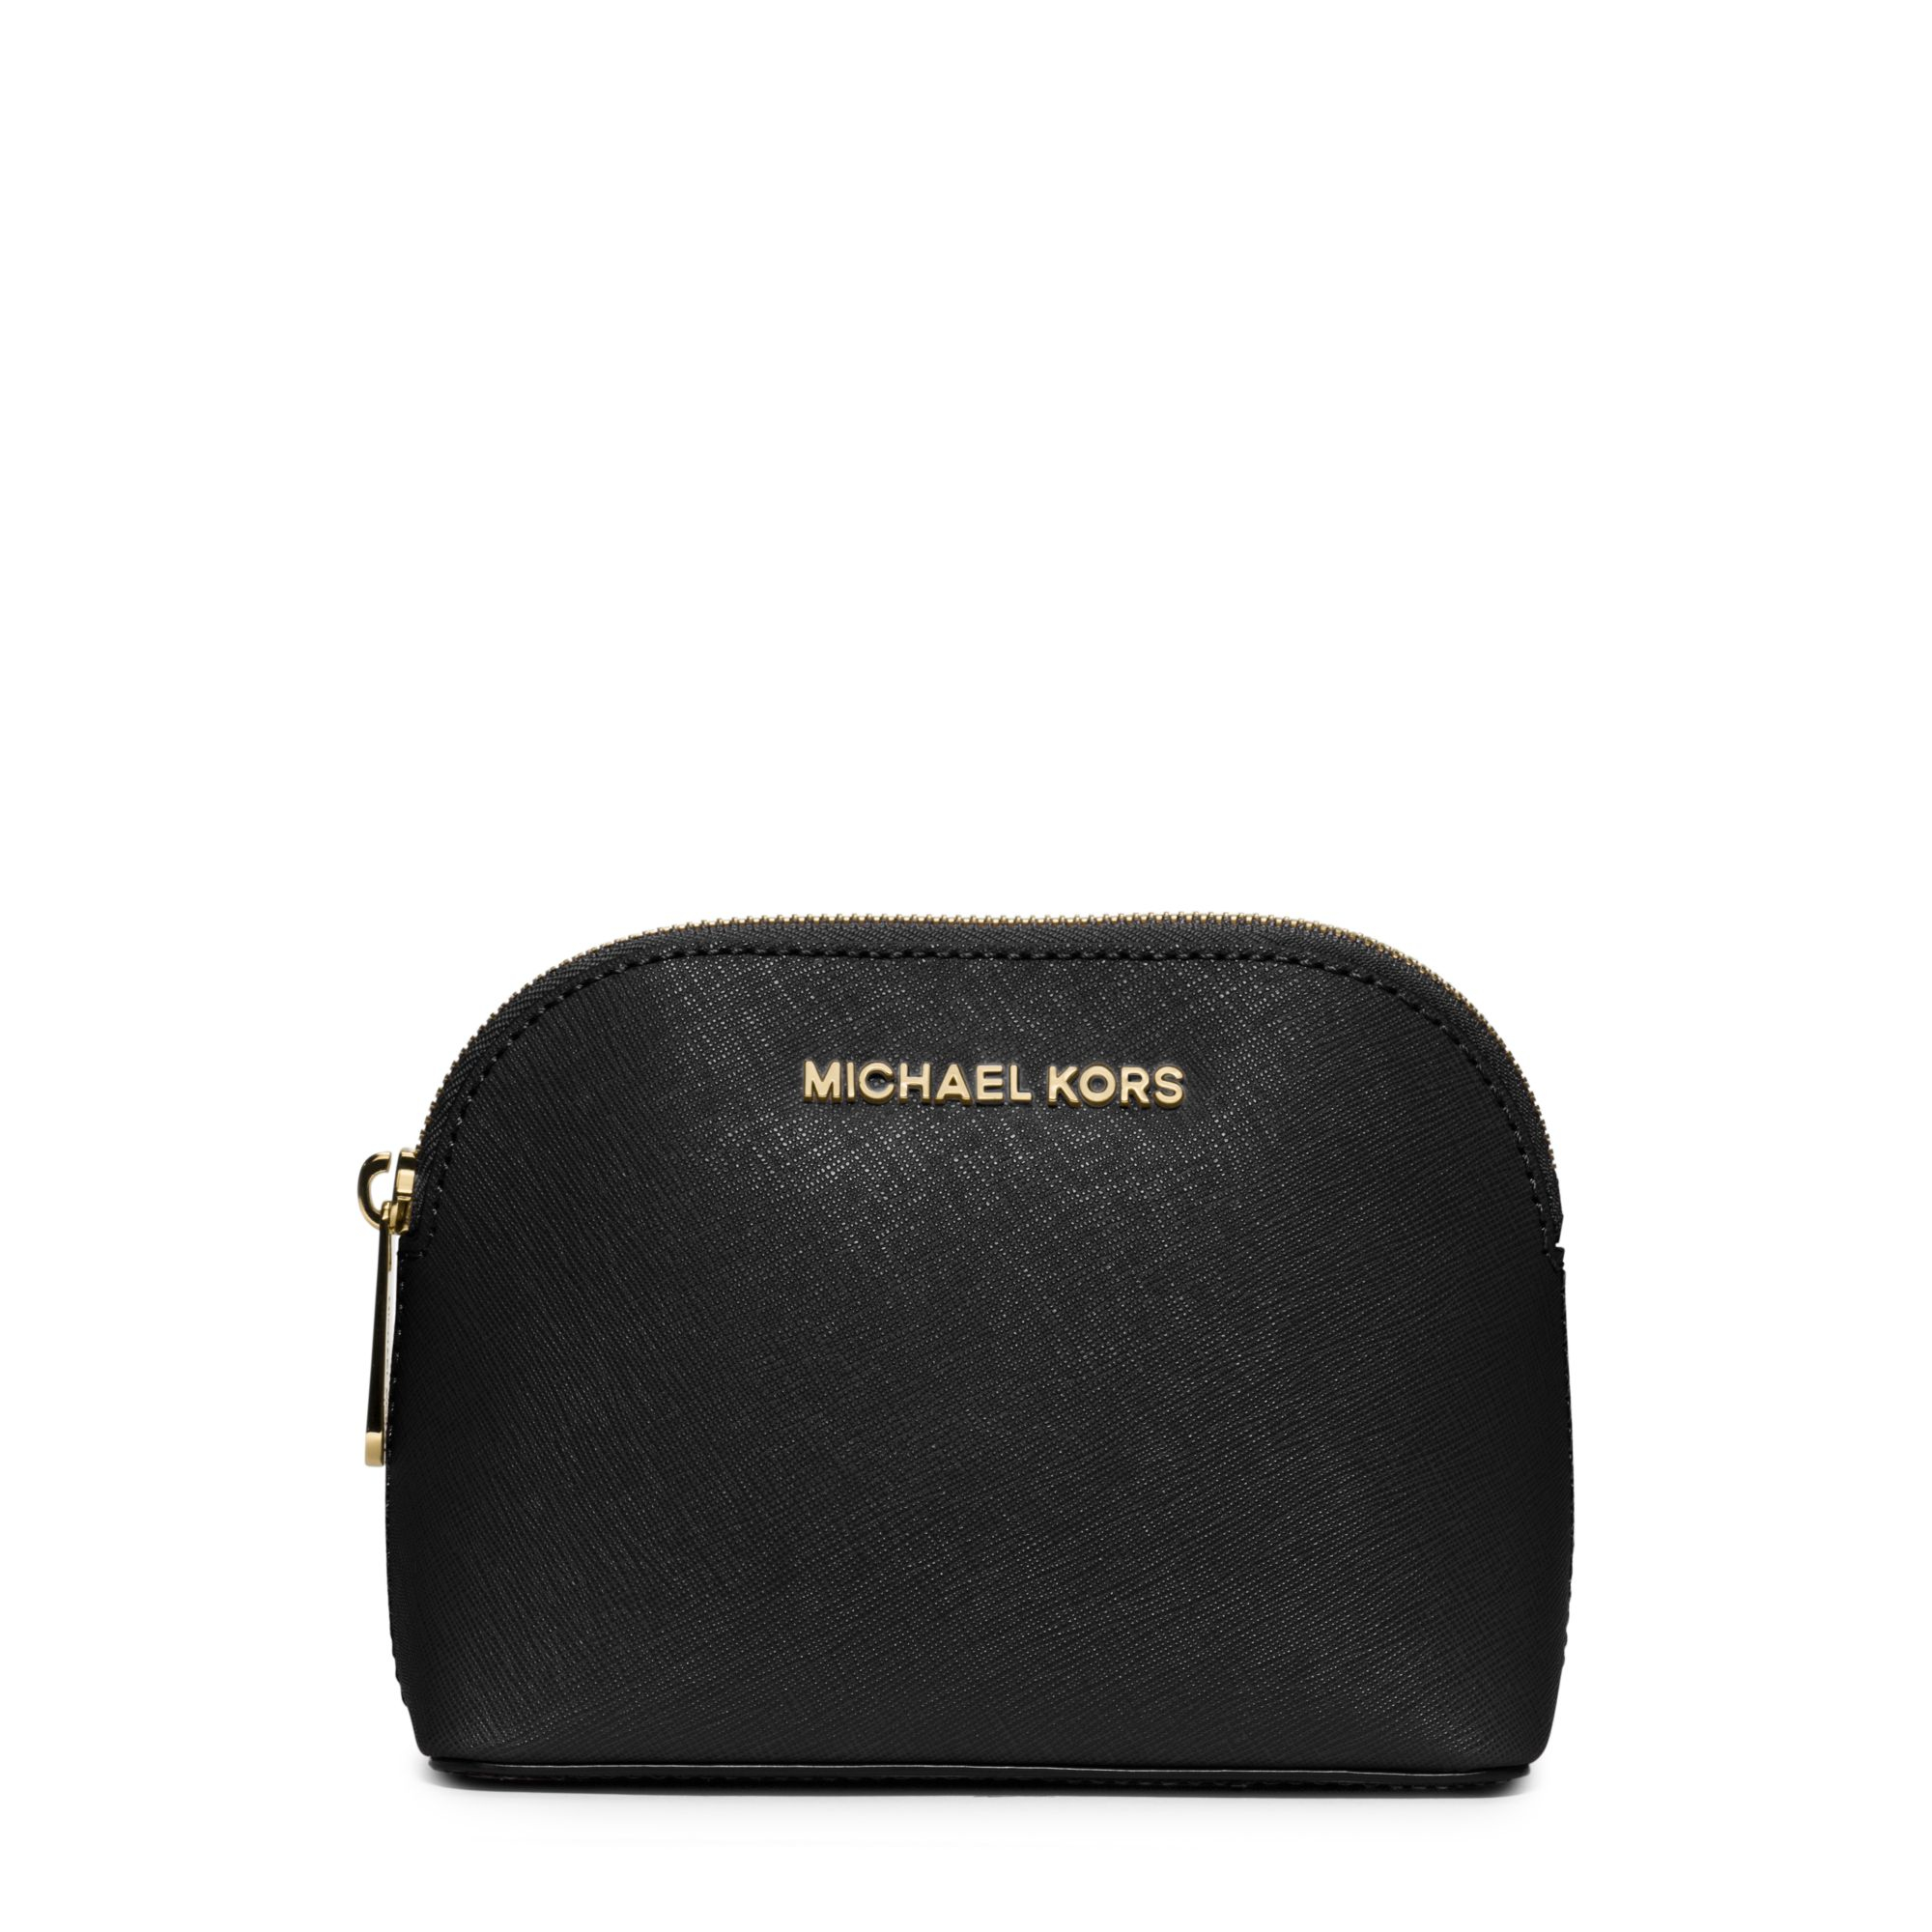 Michael kors Cindy Saffiano Leather Travel Pouch in Black